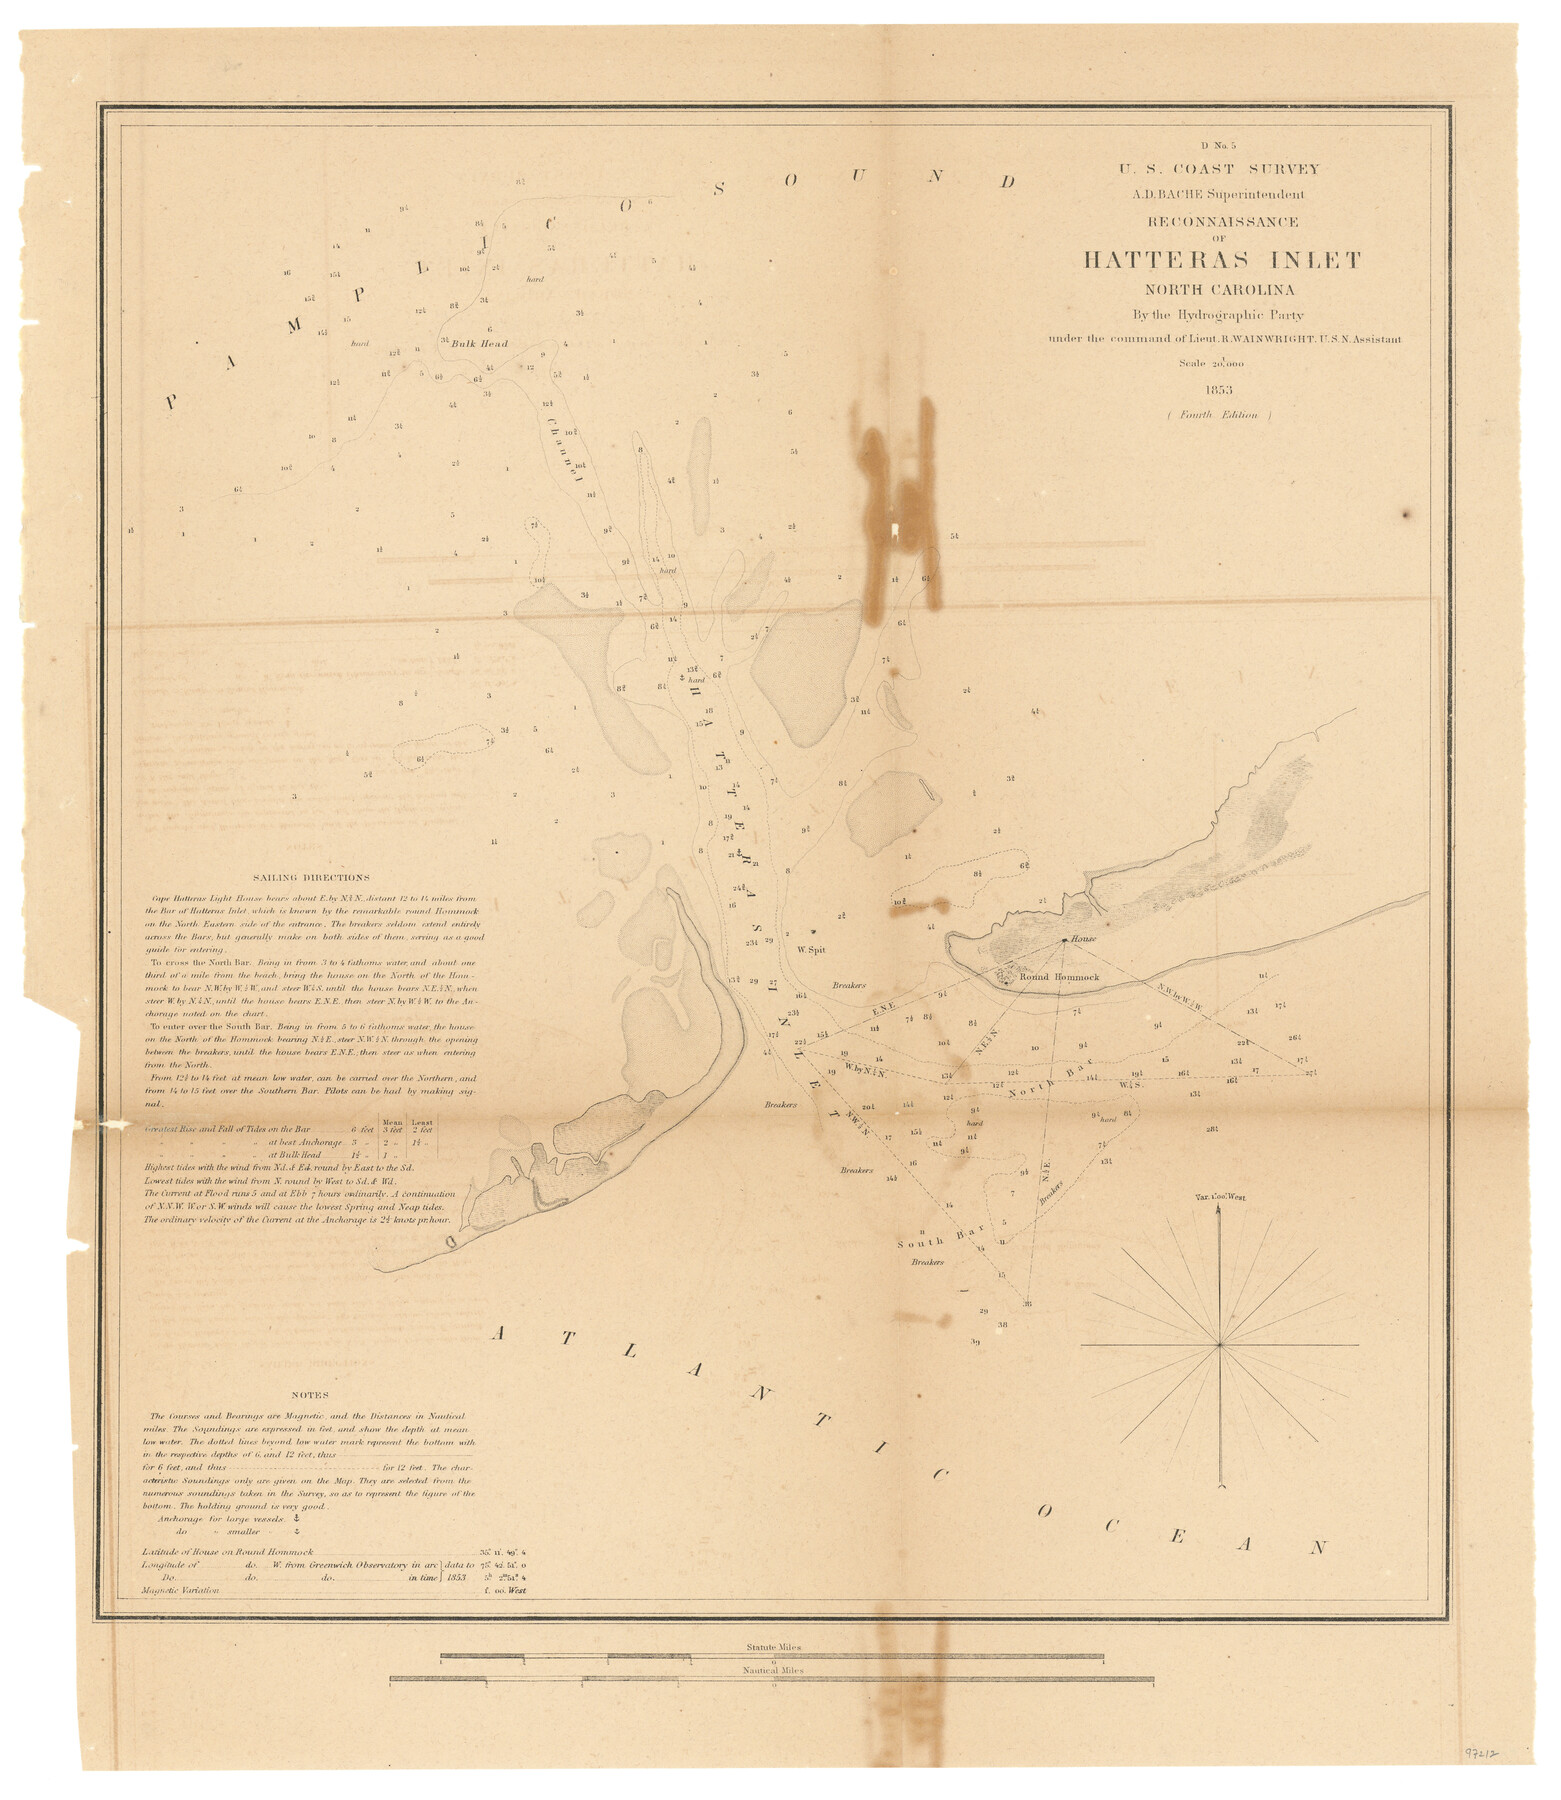 97212, D No. 5 - Reconnaissance of Hatteras Inlet, North Carolina, General Map Collection